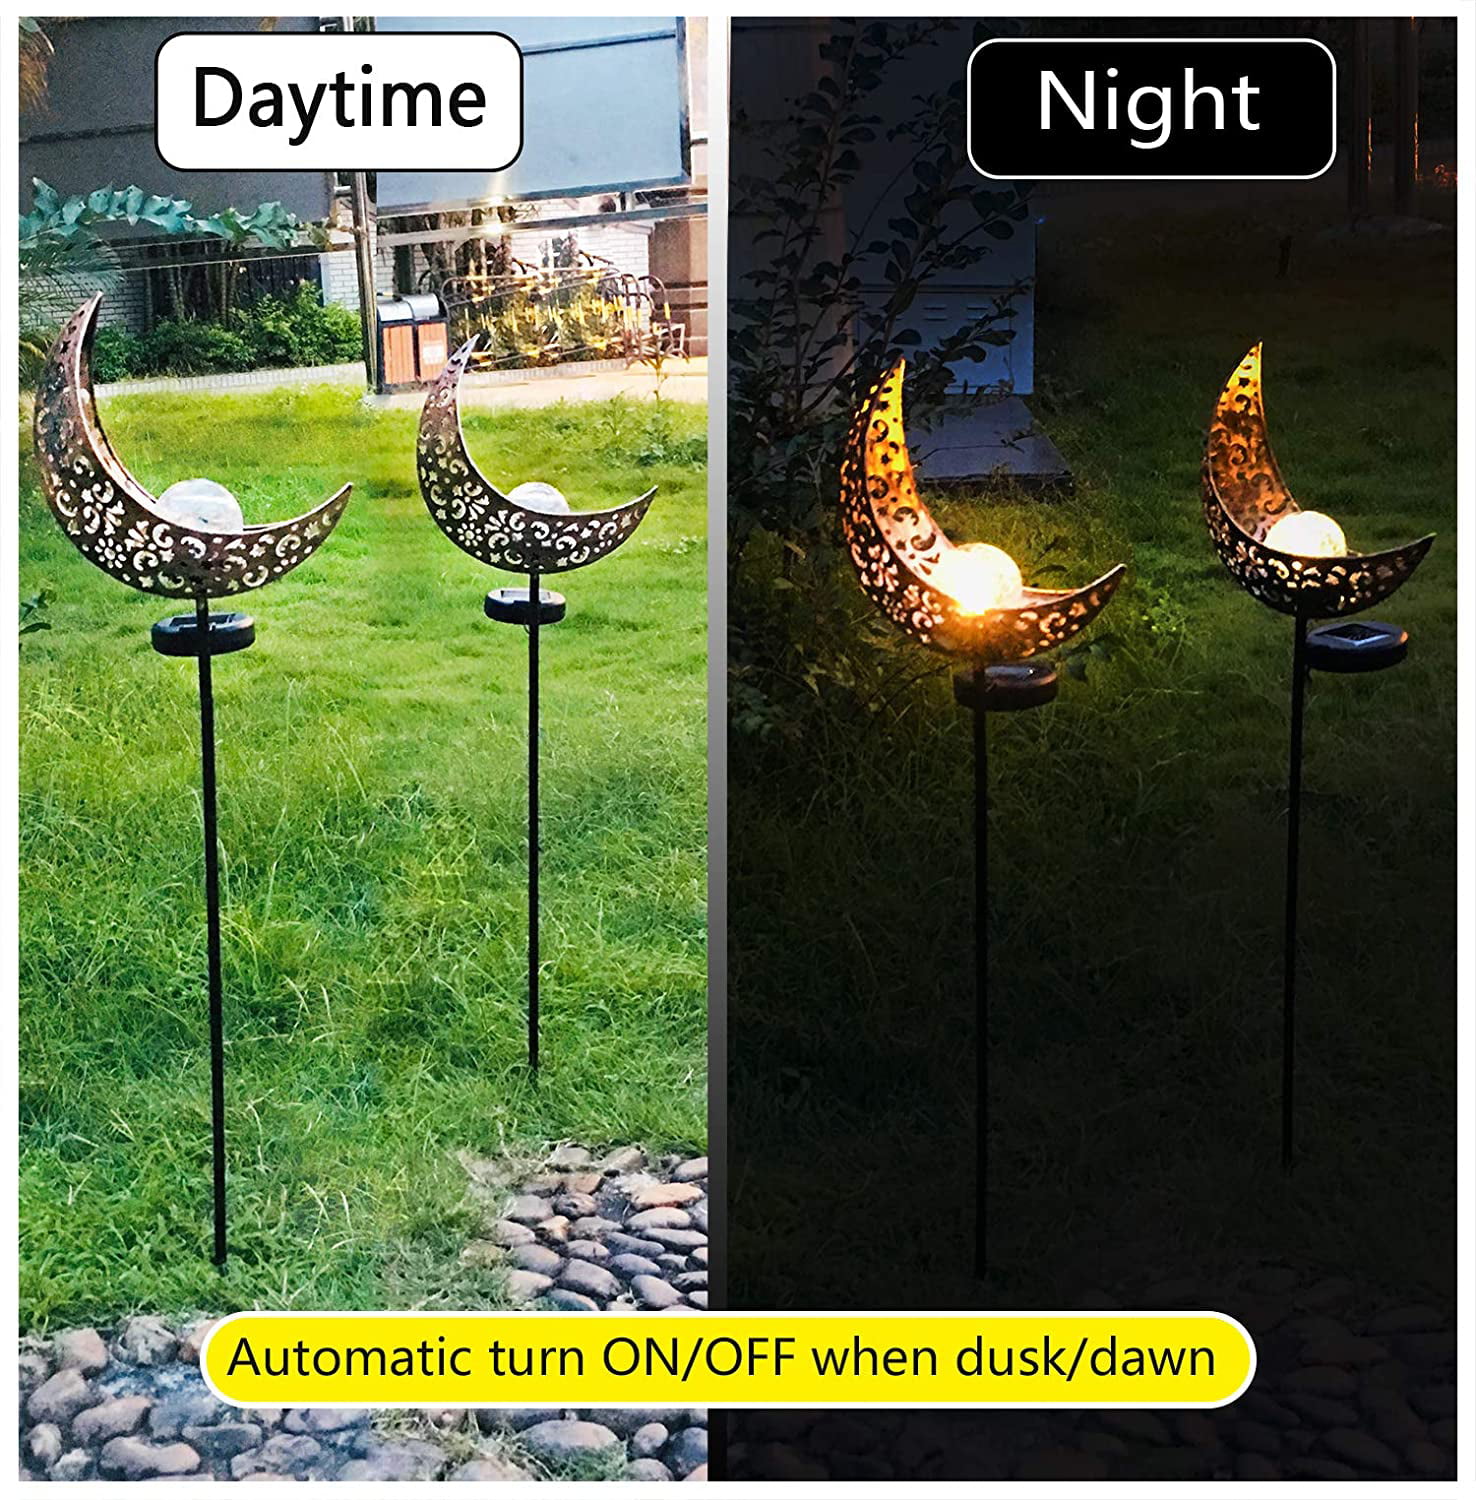 Solar Garden Lights,2 Pack Crackle Glass Globe Antique Brass Metal Stake Warm White Moon Lights,Outdoor Waterproof for Lawn Patio Yard Wedding Party Decorations Light